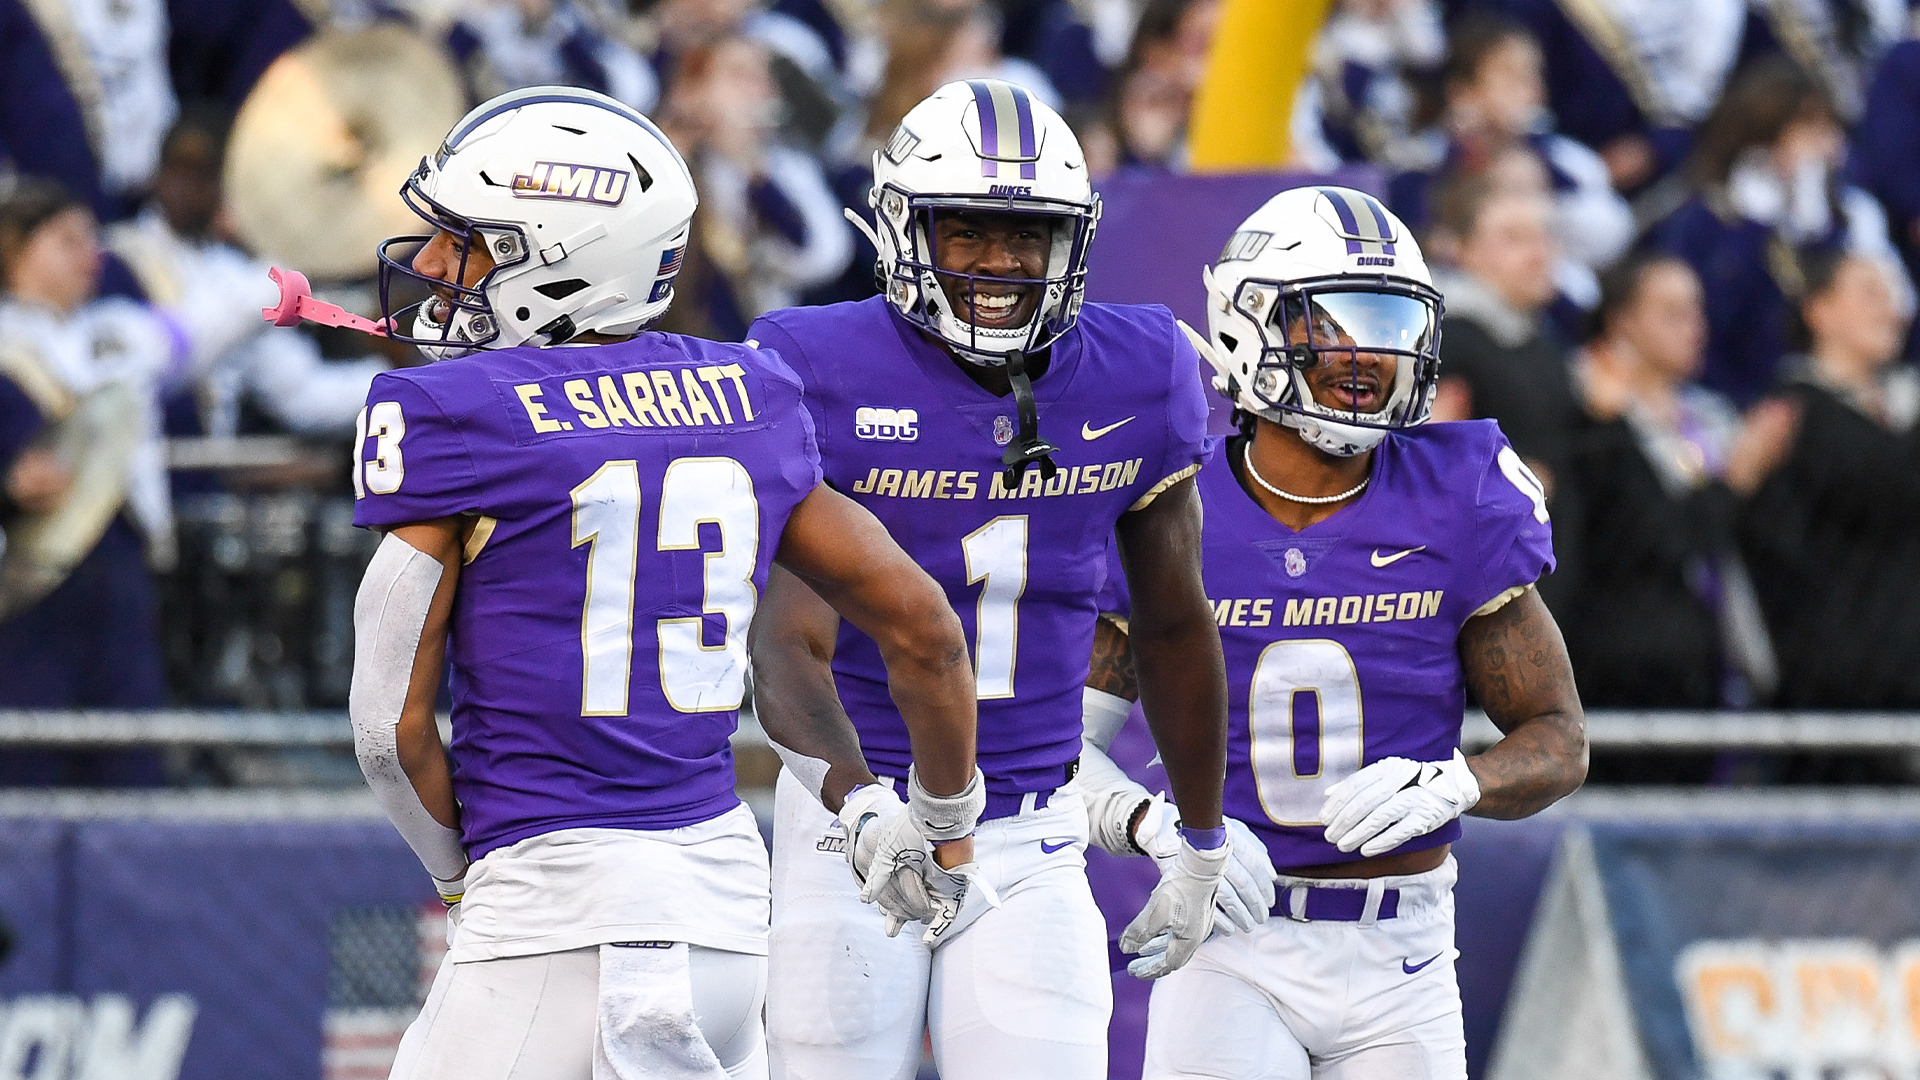 JMU Set To Make First Bowl Game Appearance In School History The Wire